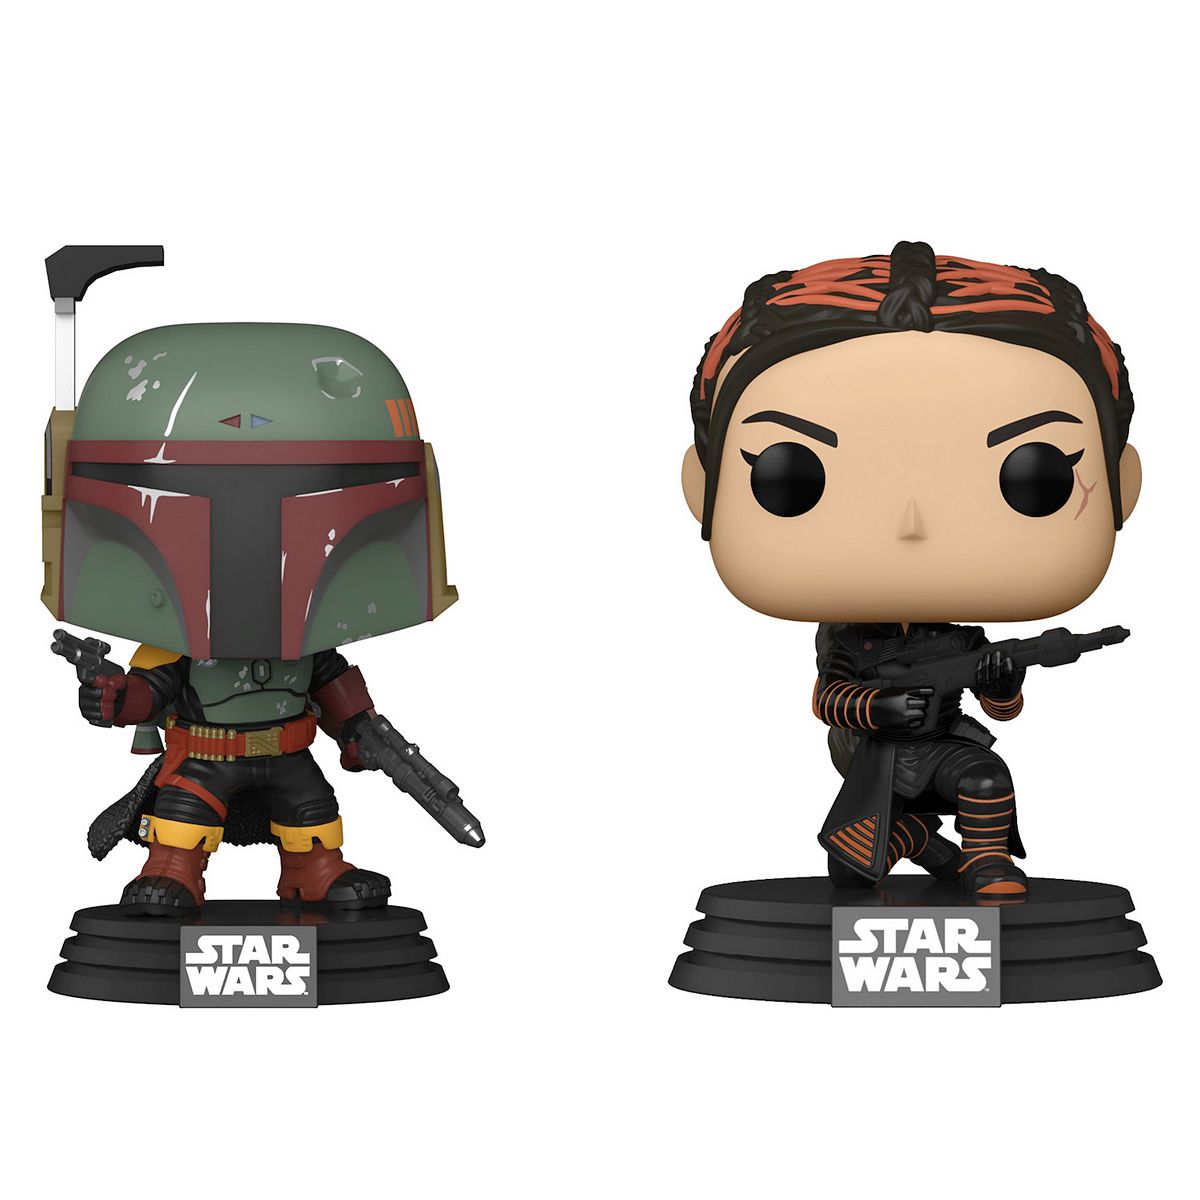 TBOBF Boba Fett and Fennec Shand Bobble Head Toy 2-Pack Set 2